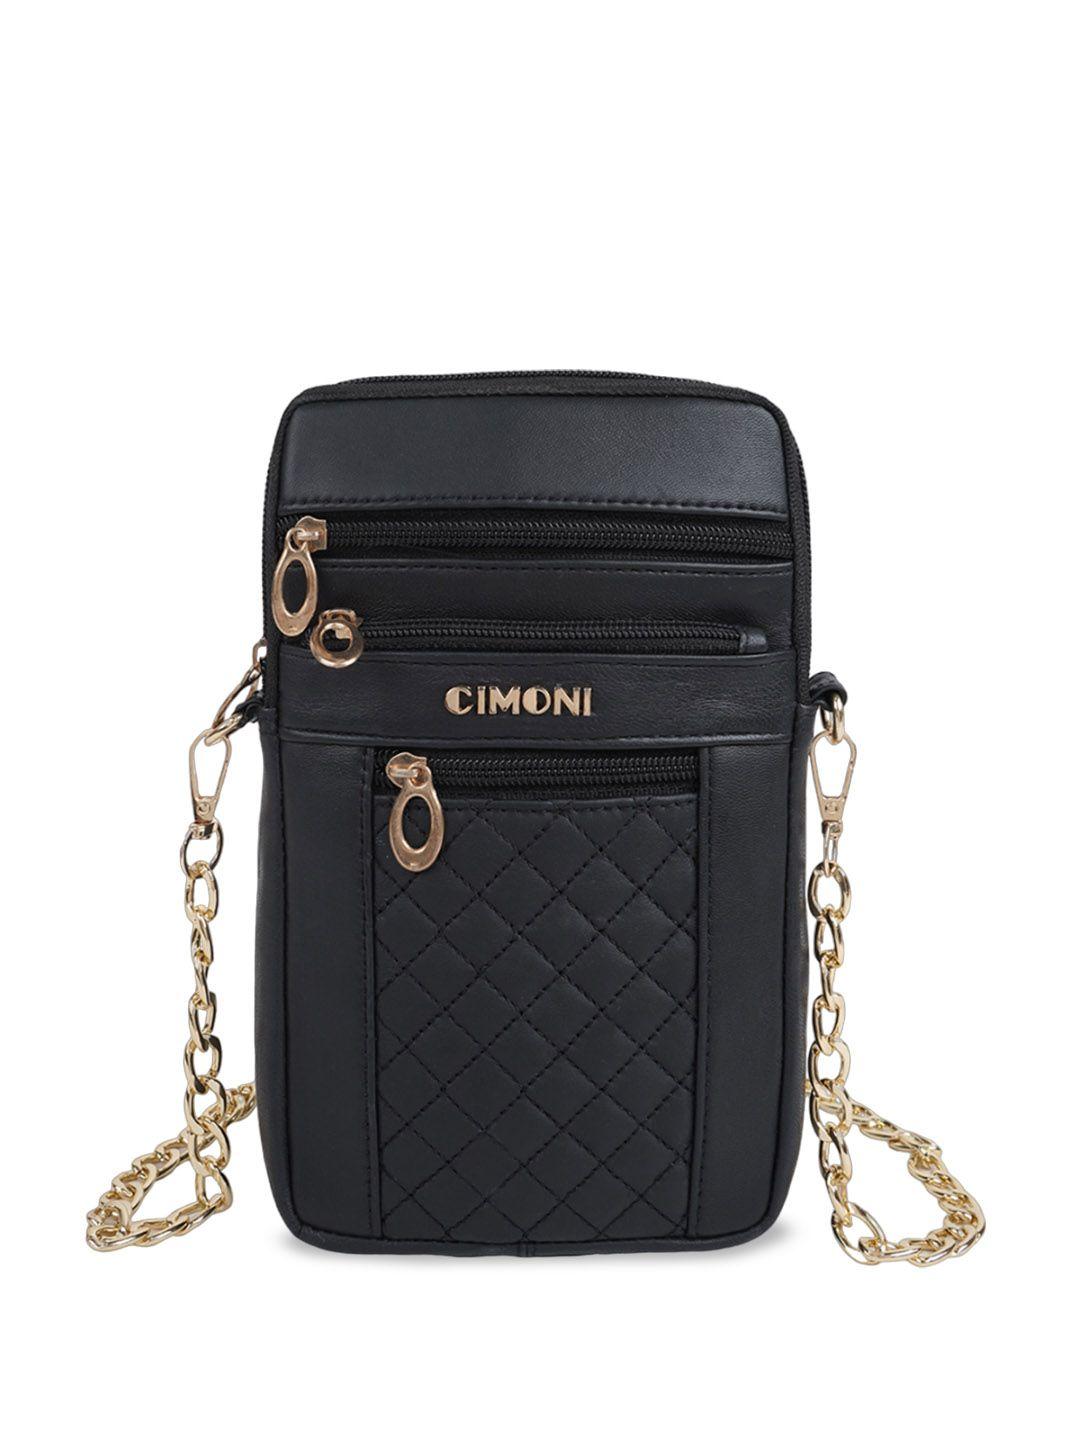 cimoni black textured leather structured sling bag with quilted